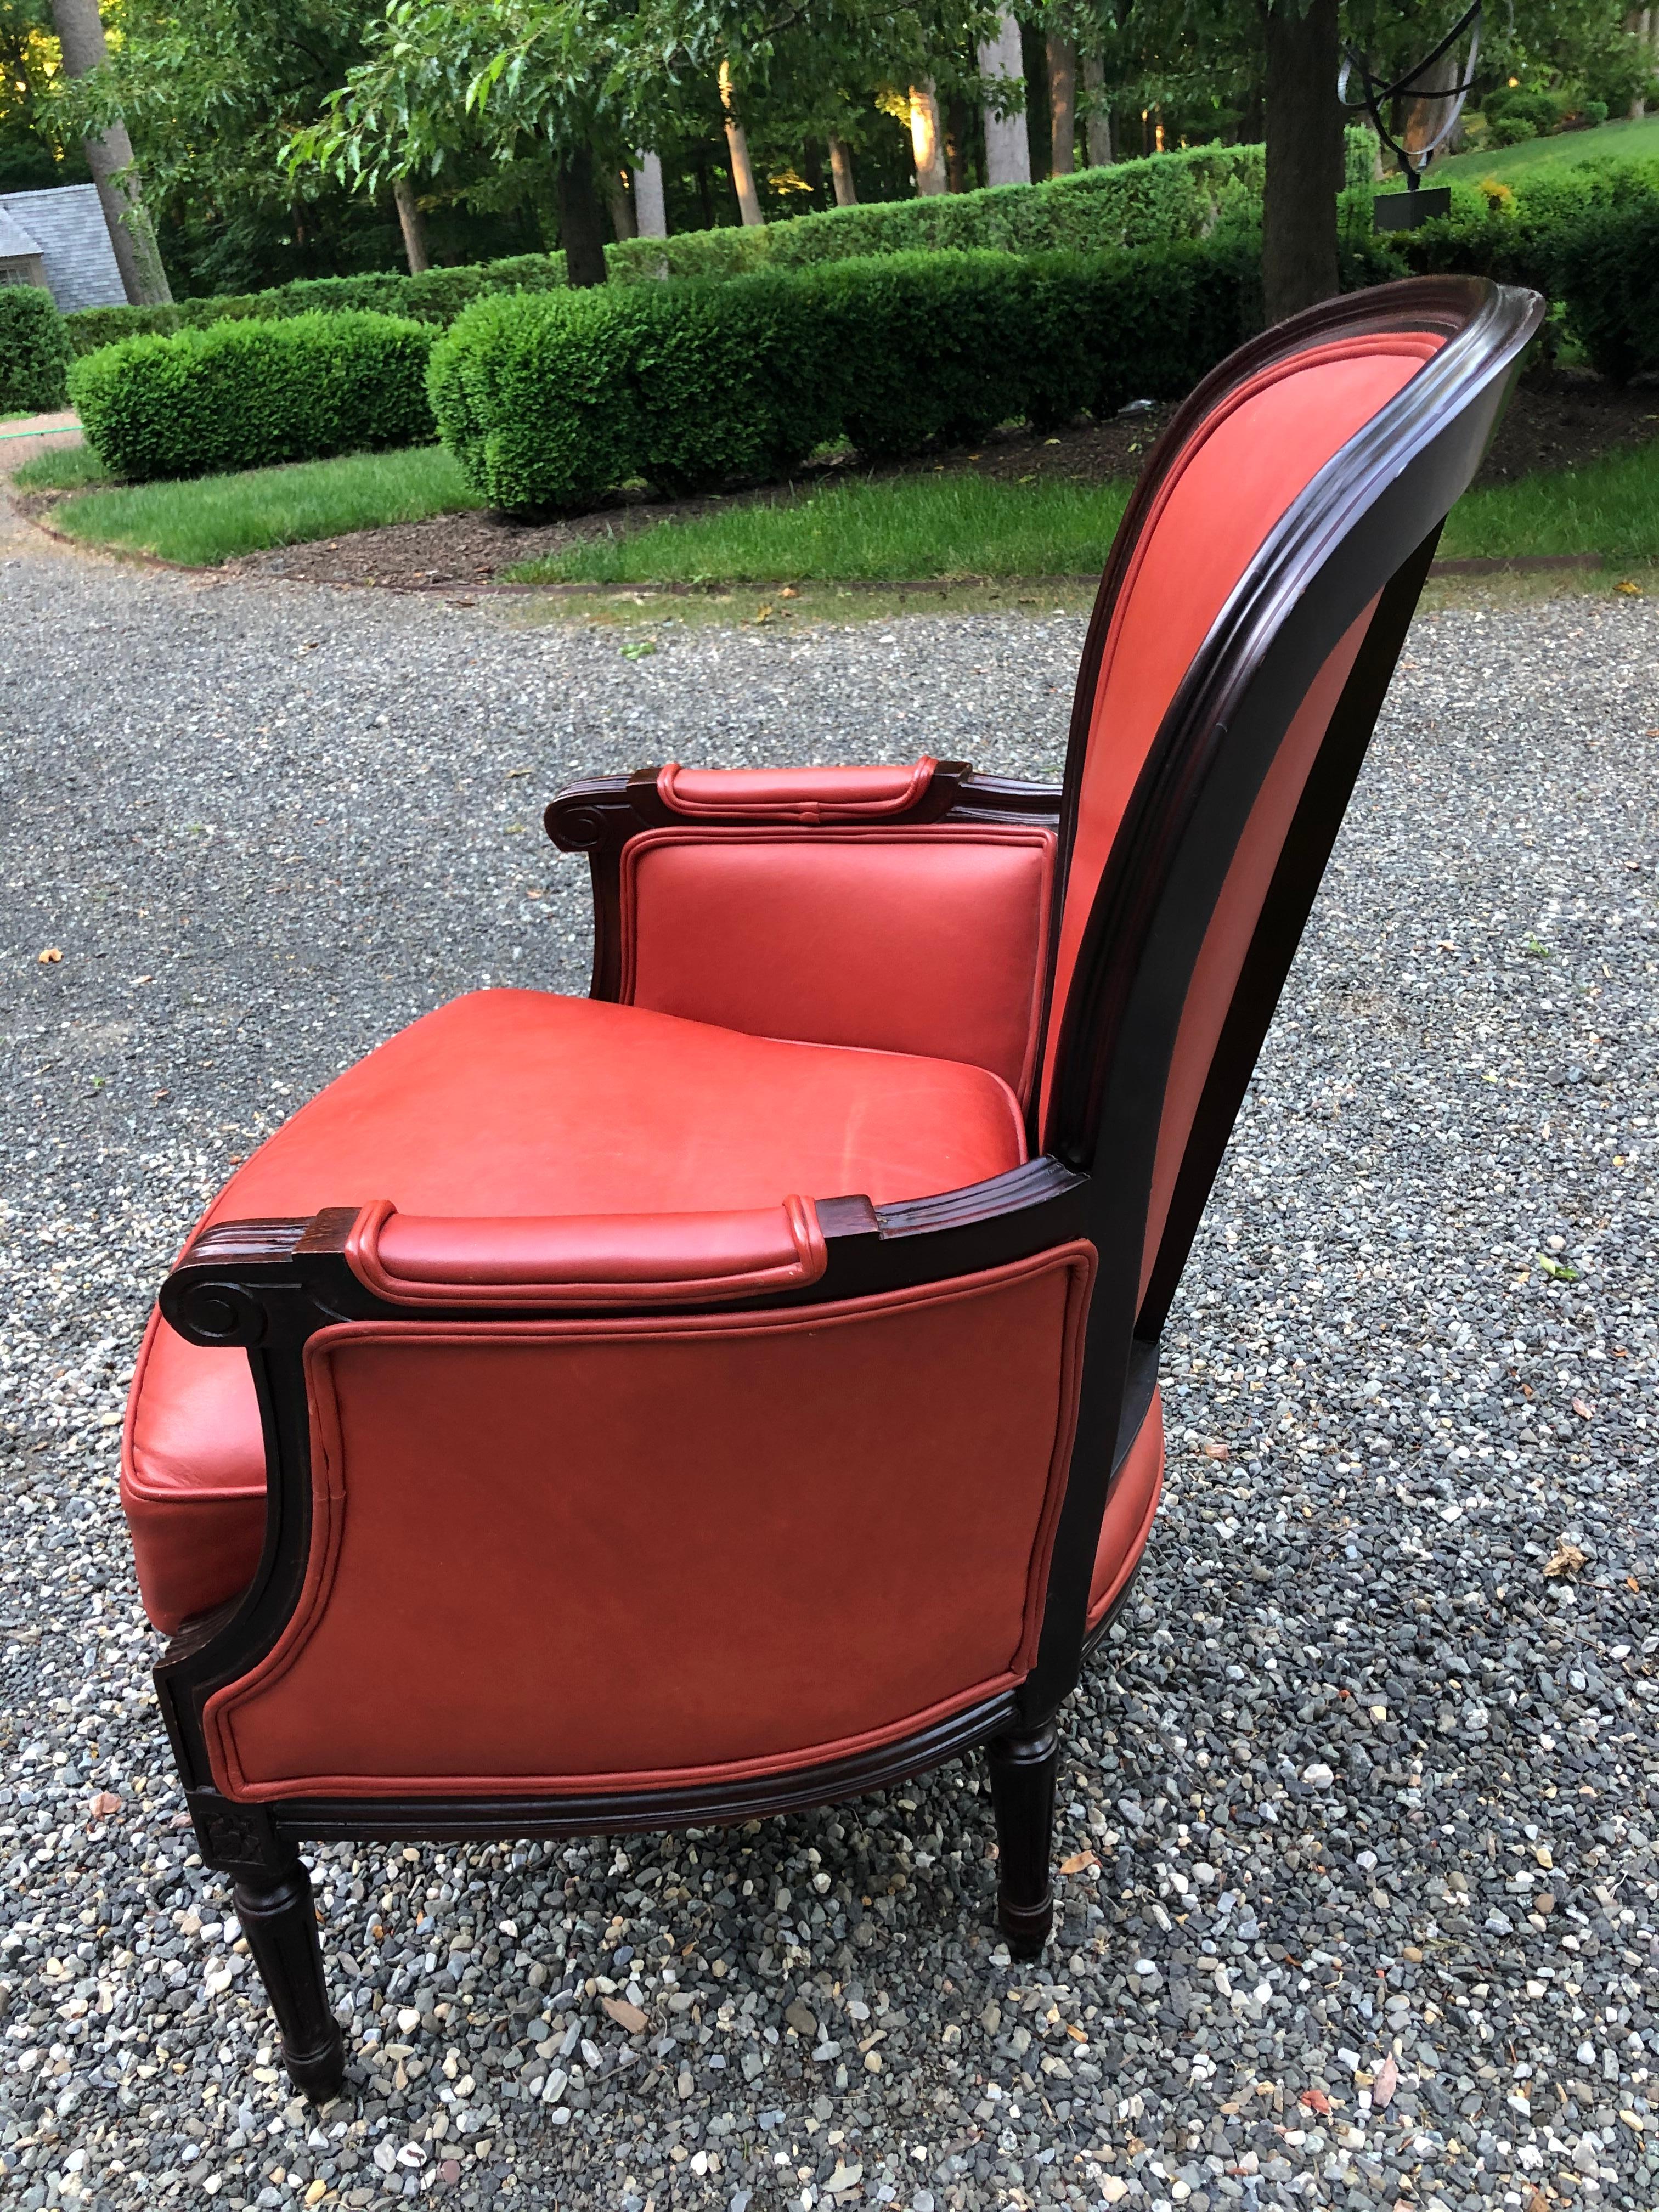 Vintage leather armchair in a fabulous shade of persimmon. The chair is constructed of mahogany and has detailed carving on arms and legs. Cushion is feather and down as indicated on tags. Extremely comfortable and adds a stylish pop of